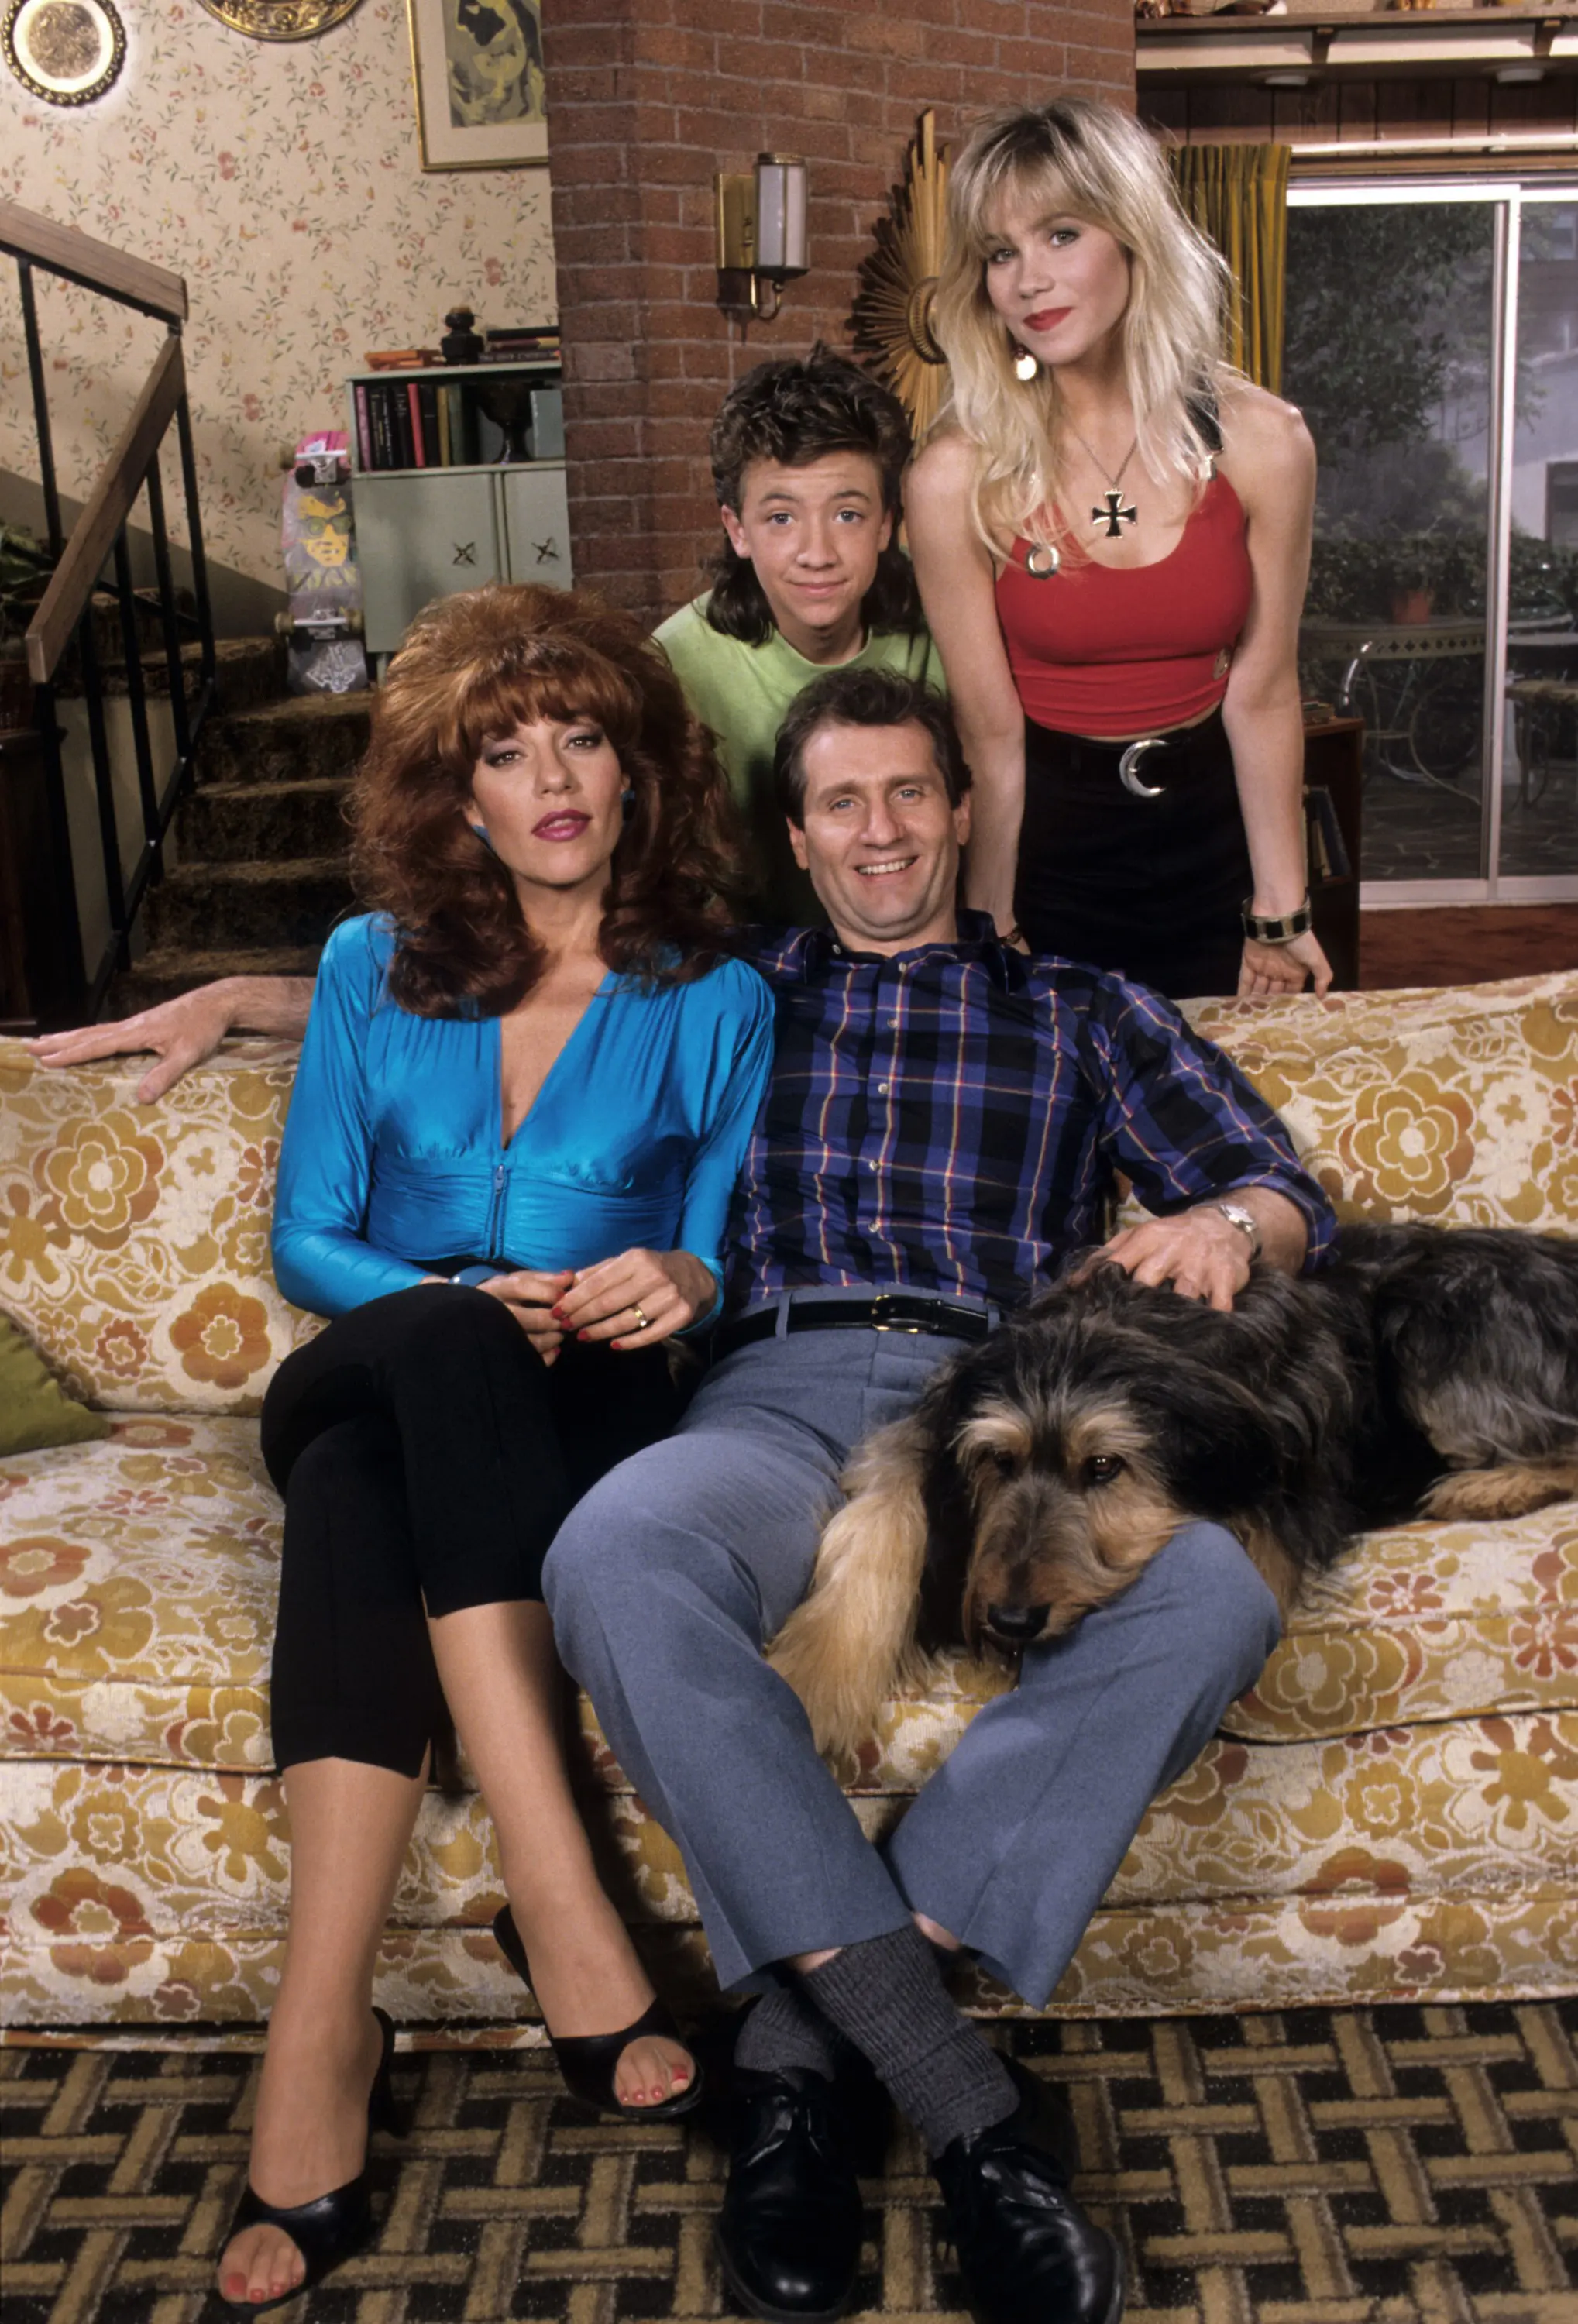 MARRIED...WITH CHILDREN, from left: Katey Sagal, David Faustino (top), Ed O'Neill, Christina Applegate, 1987-1997